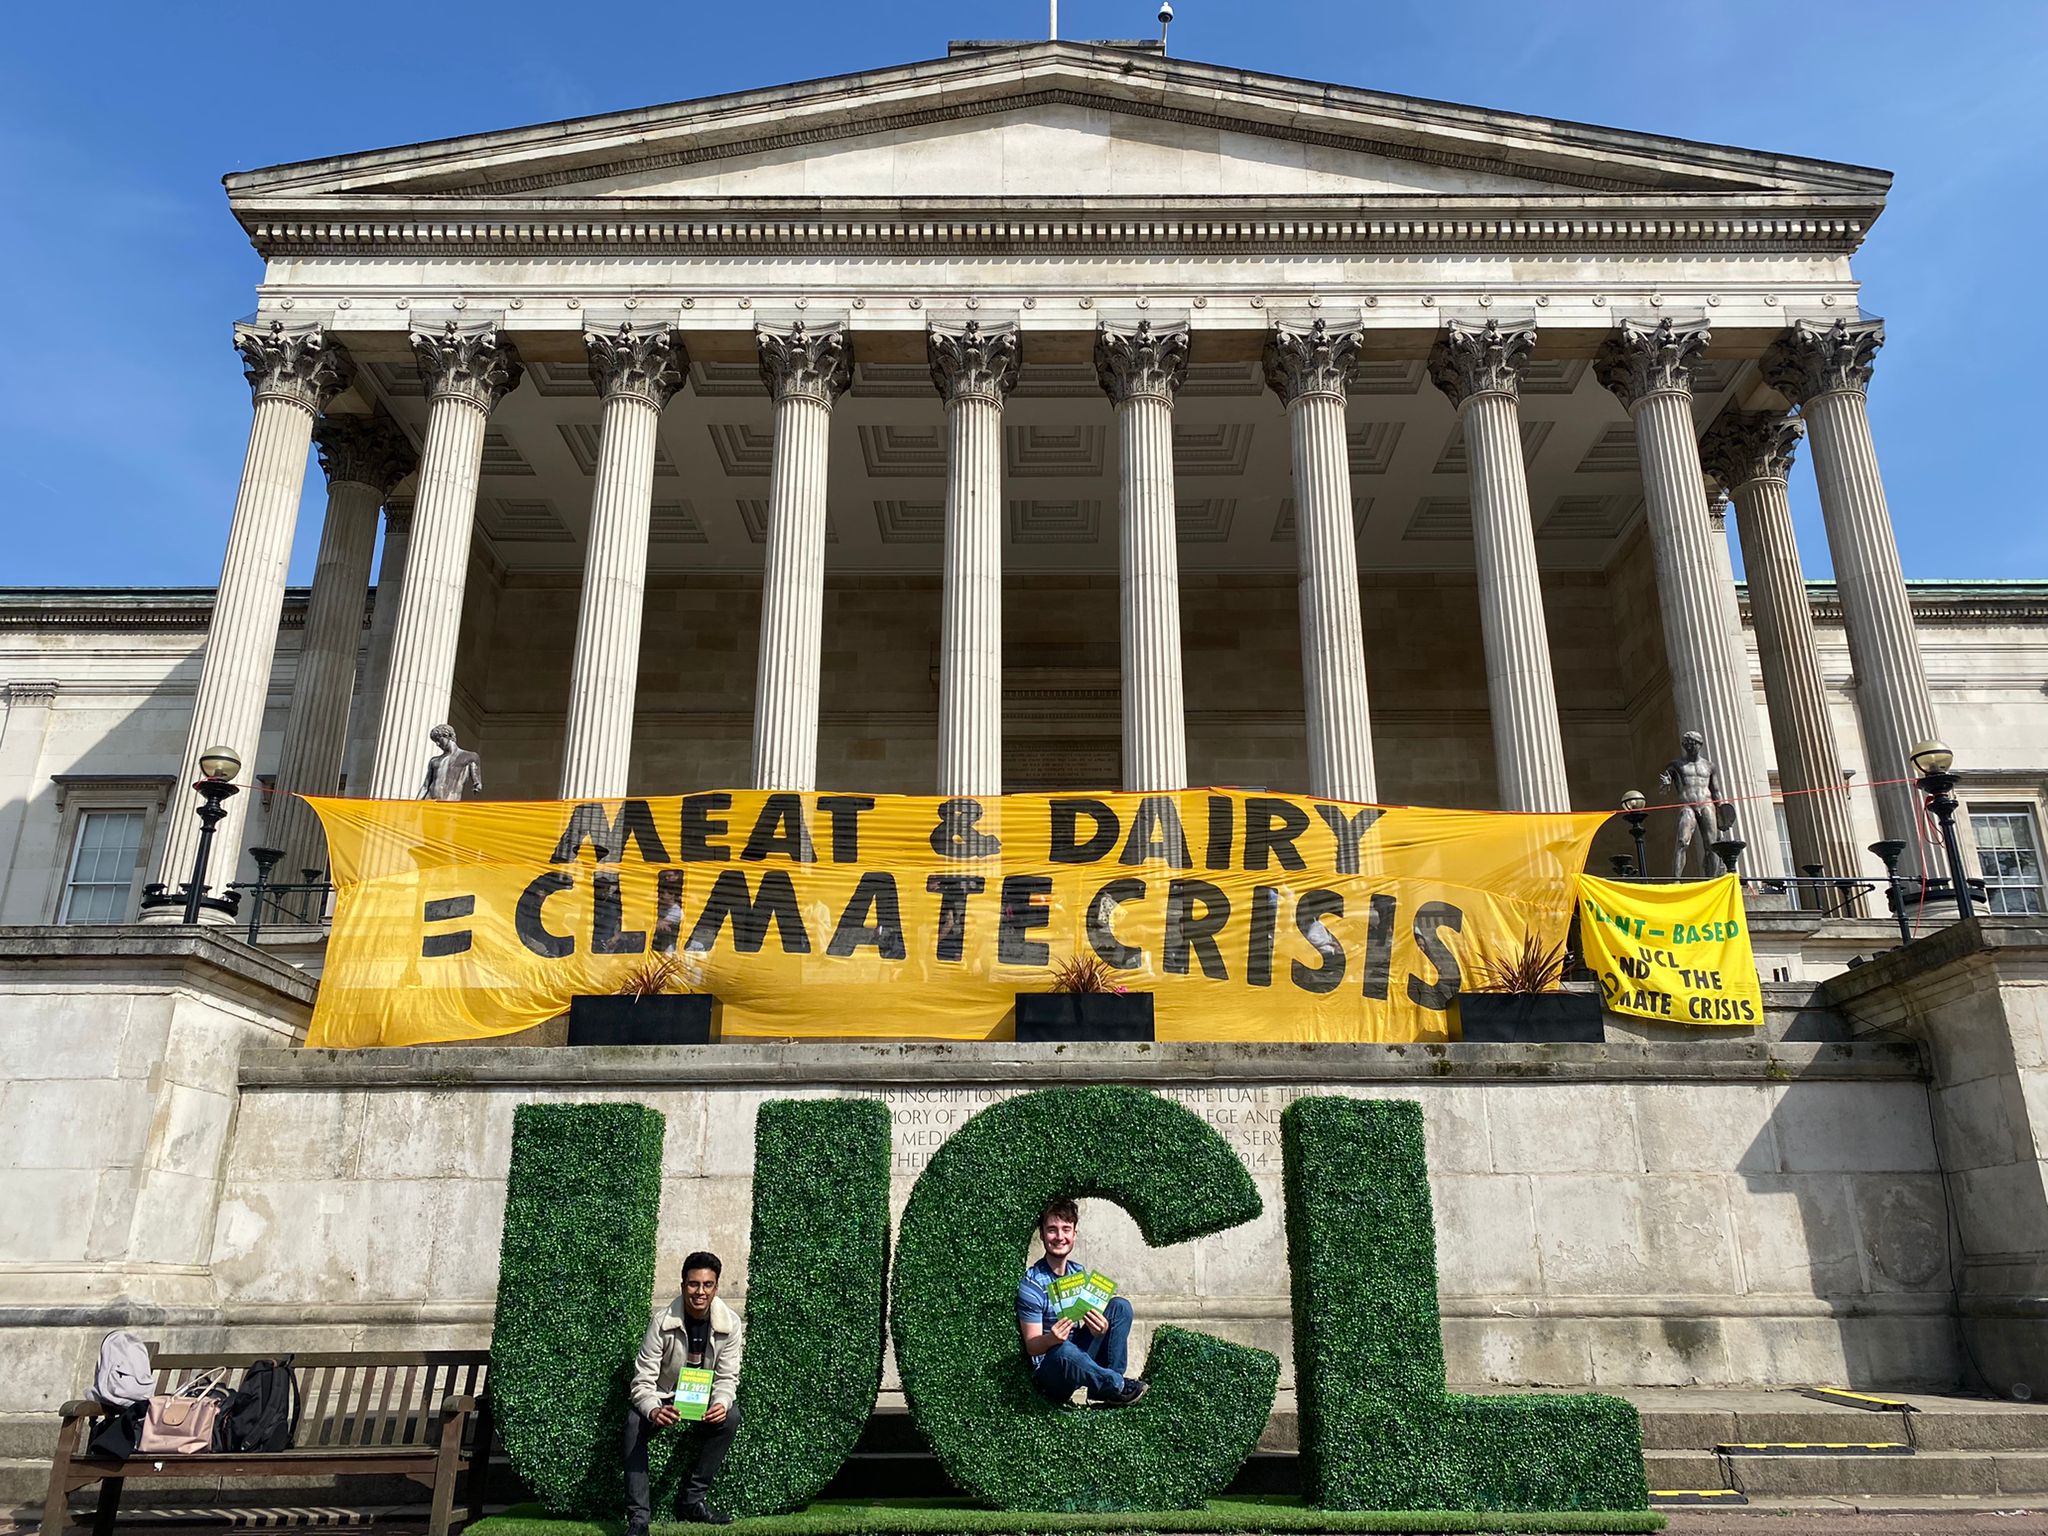 Photo of protesters at UCL displaying a yellow banner with black text reading 'Meat & dairy = climate crisis'